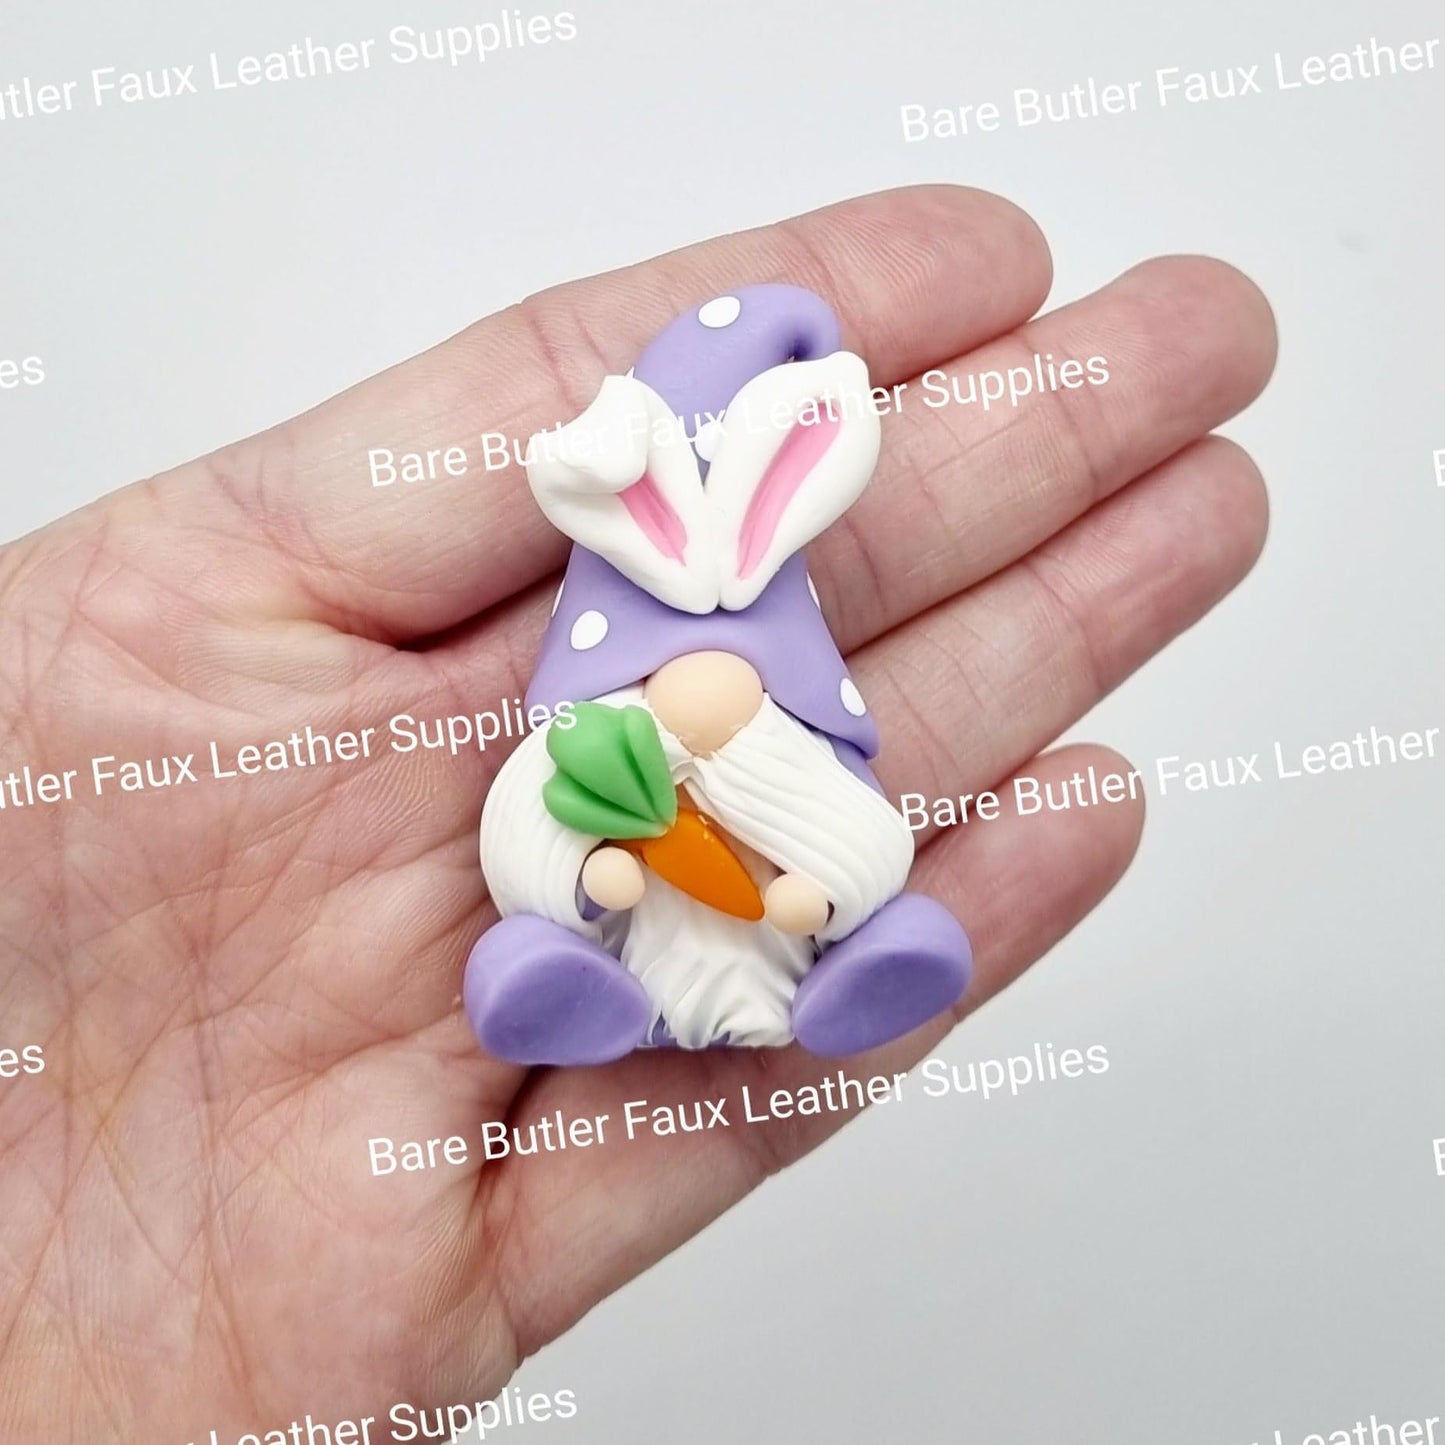 Bunny Gnome Purple Holding Carrot - Bare Butler Faux Leather Supplies 